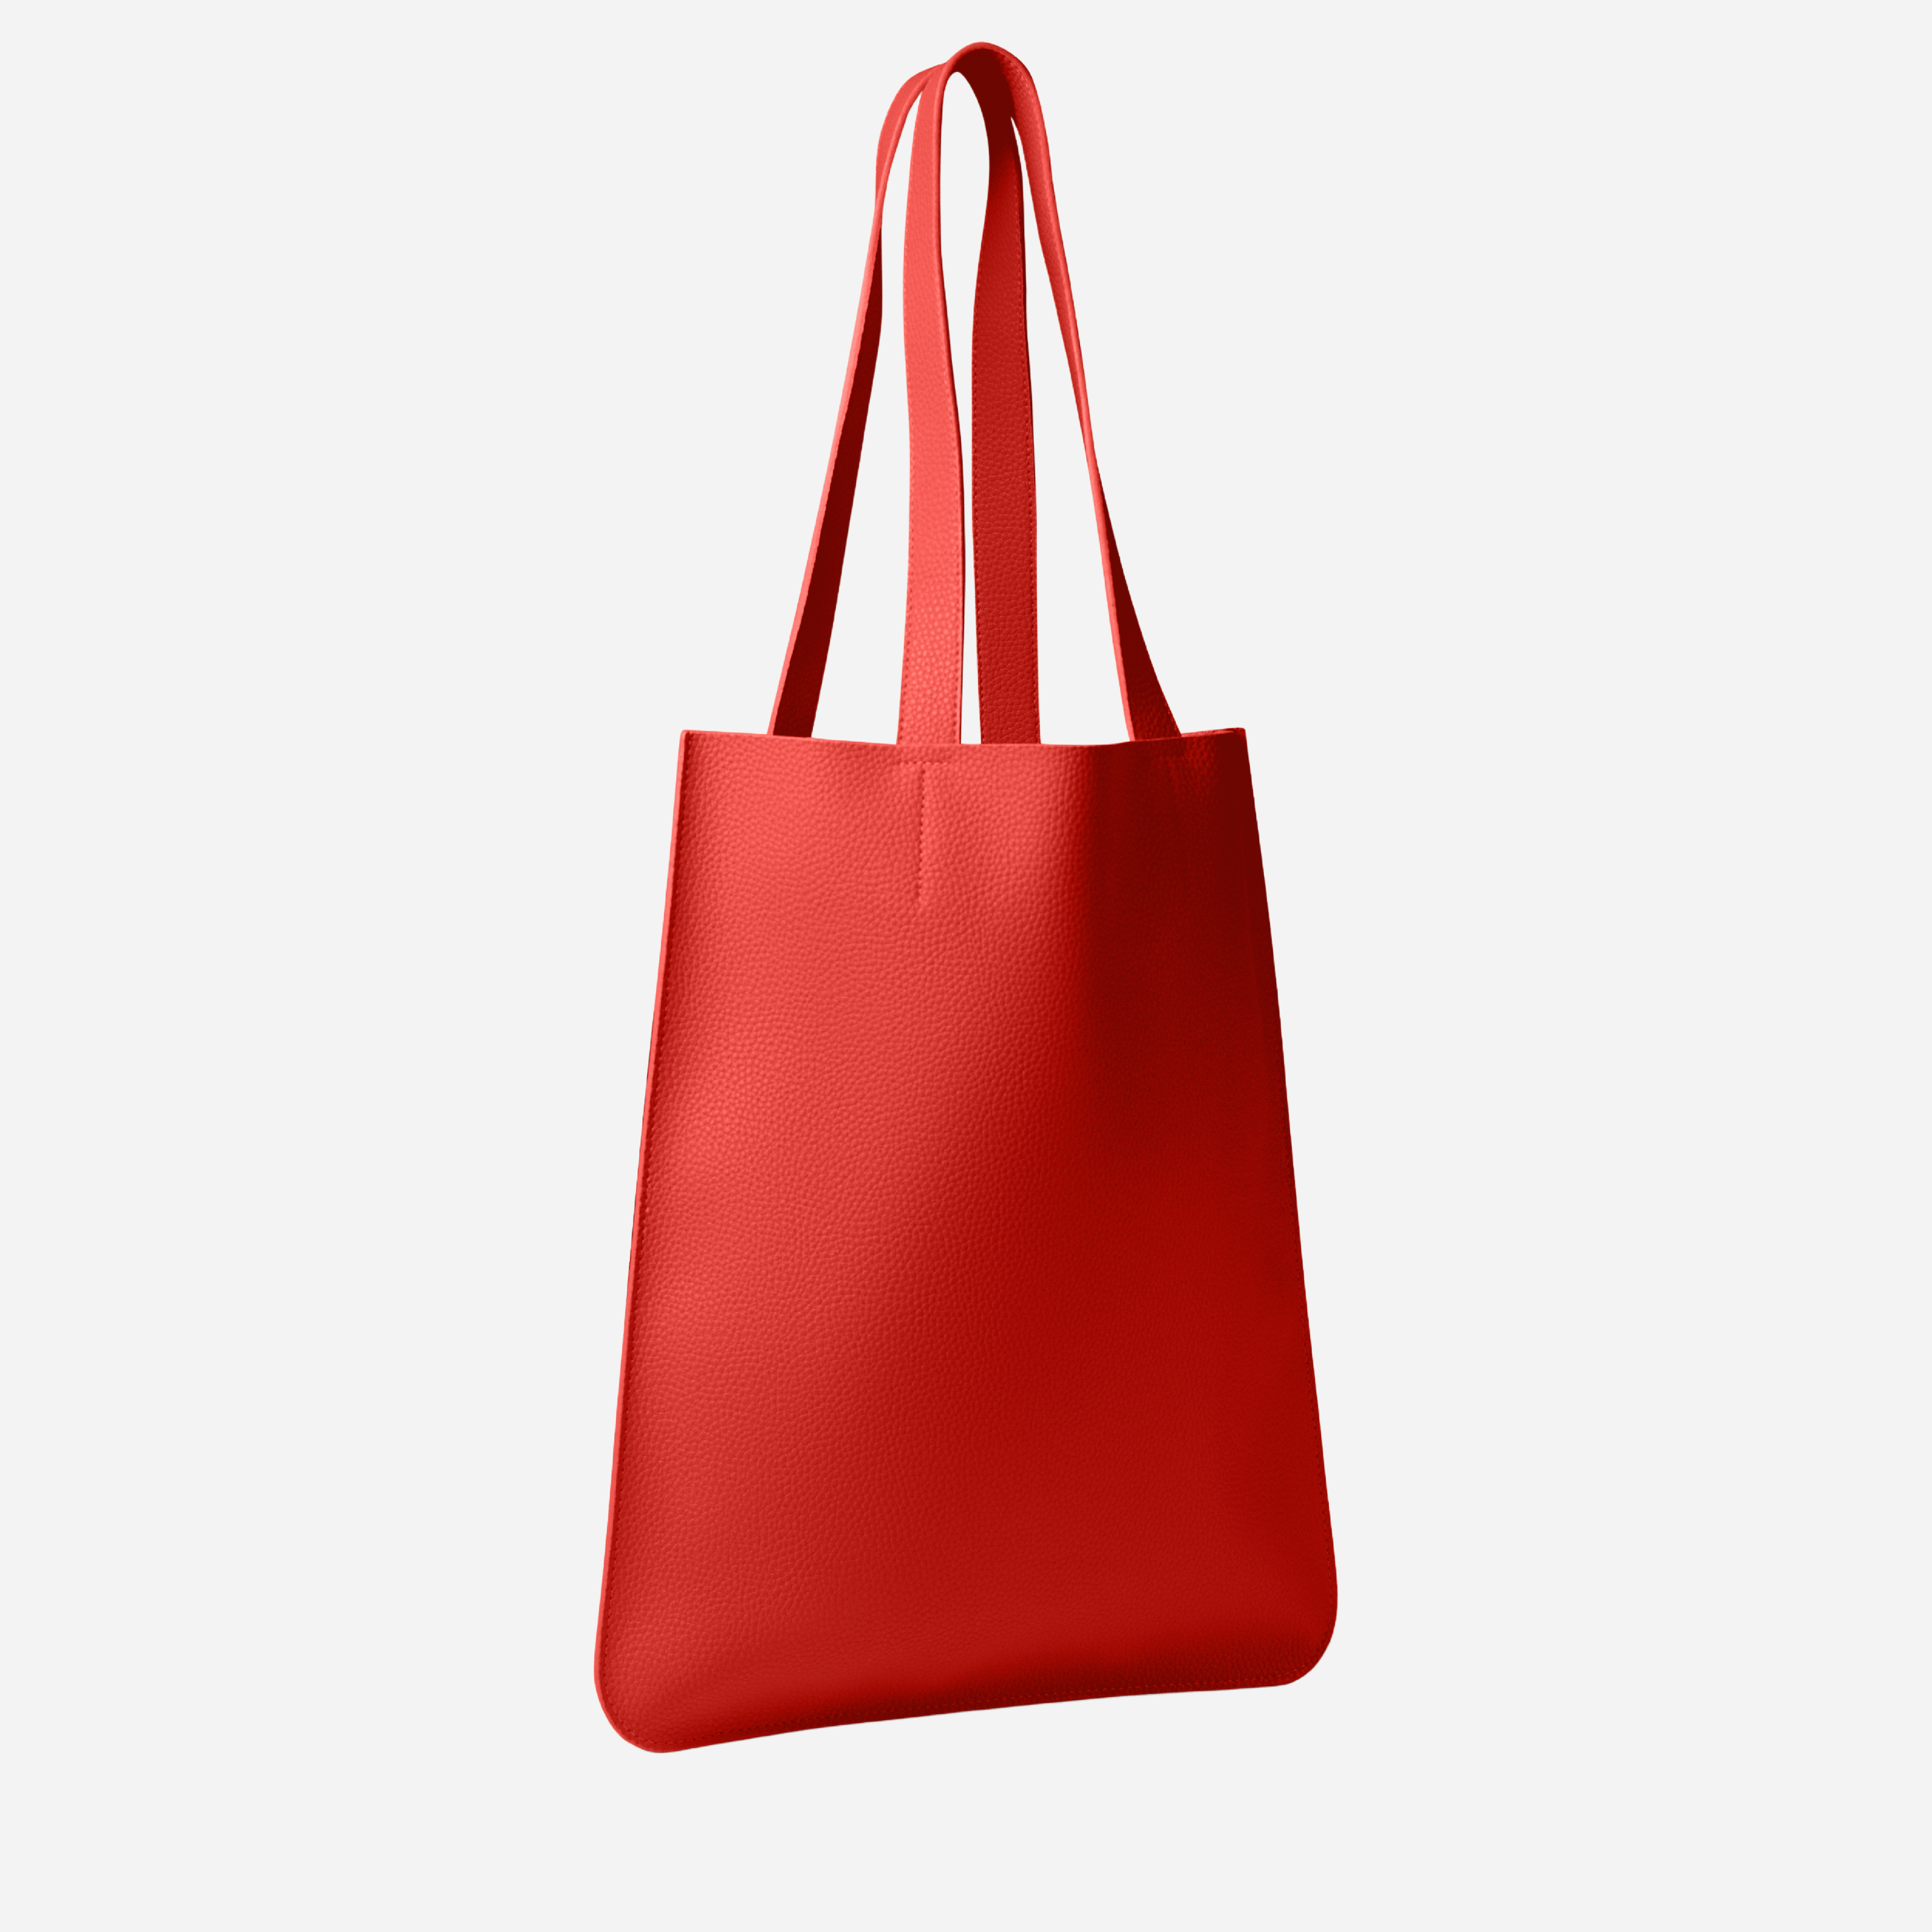 East Tote in Coral Red side angle